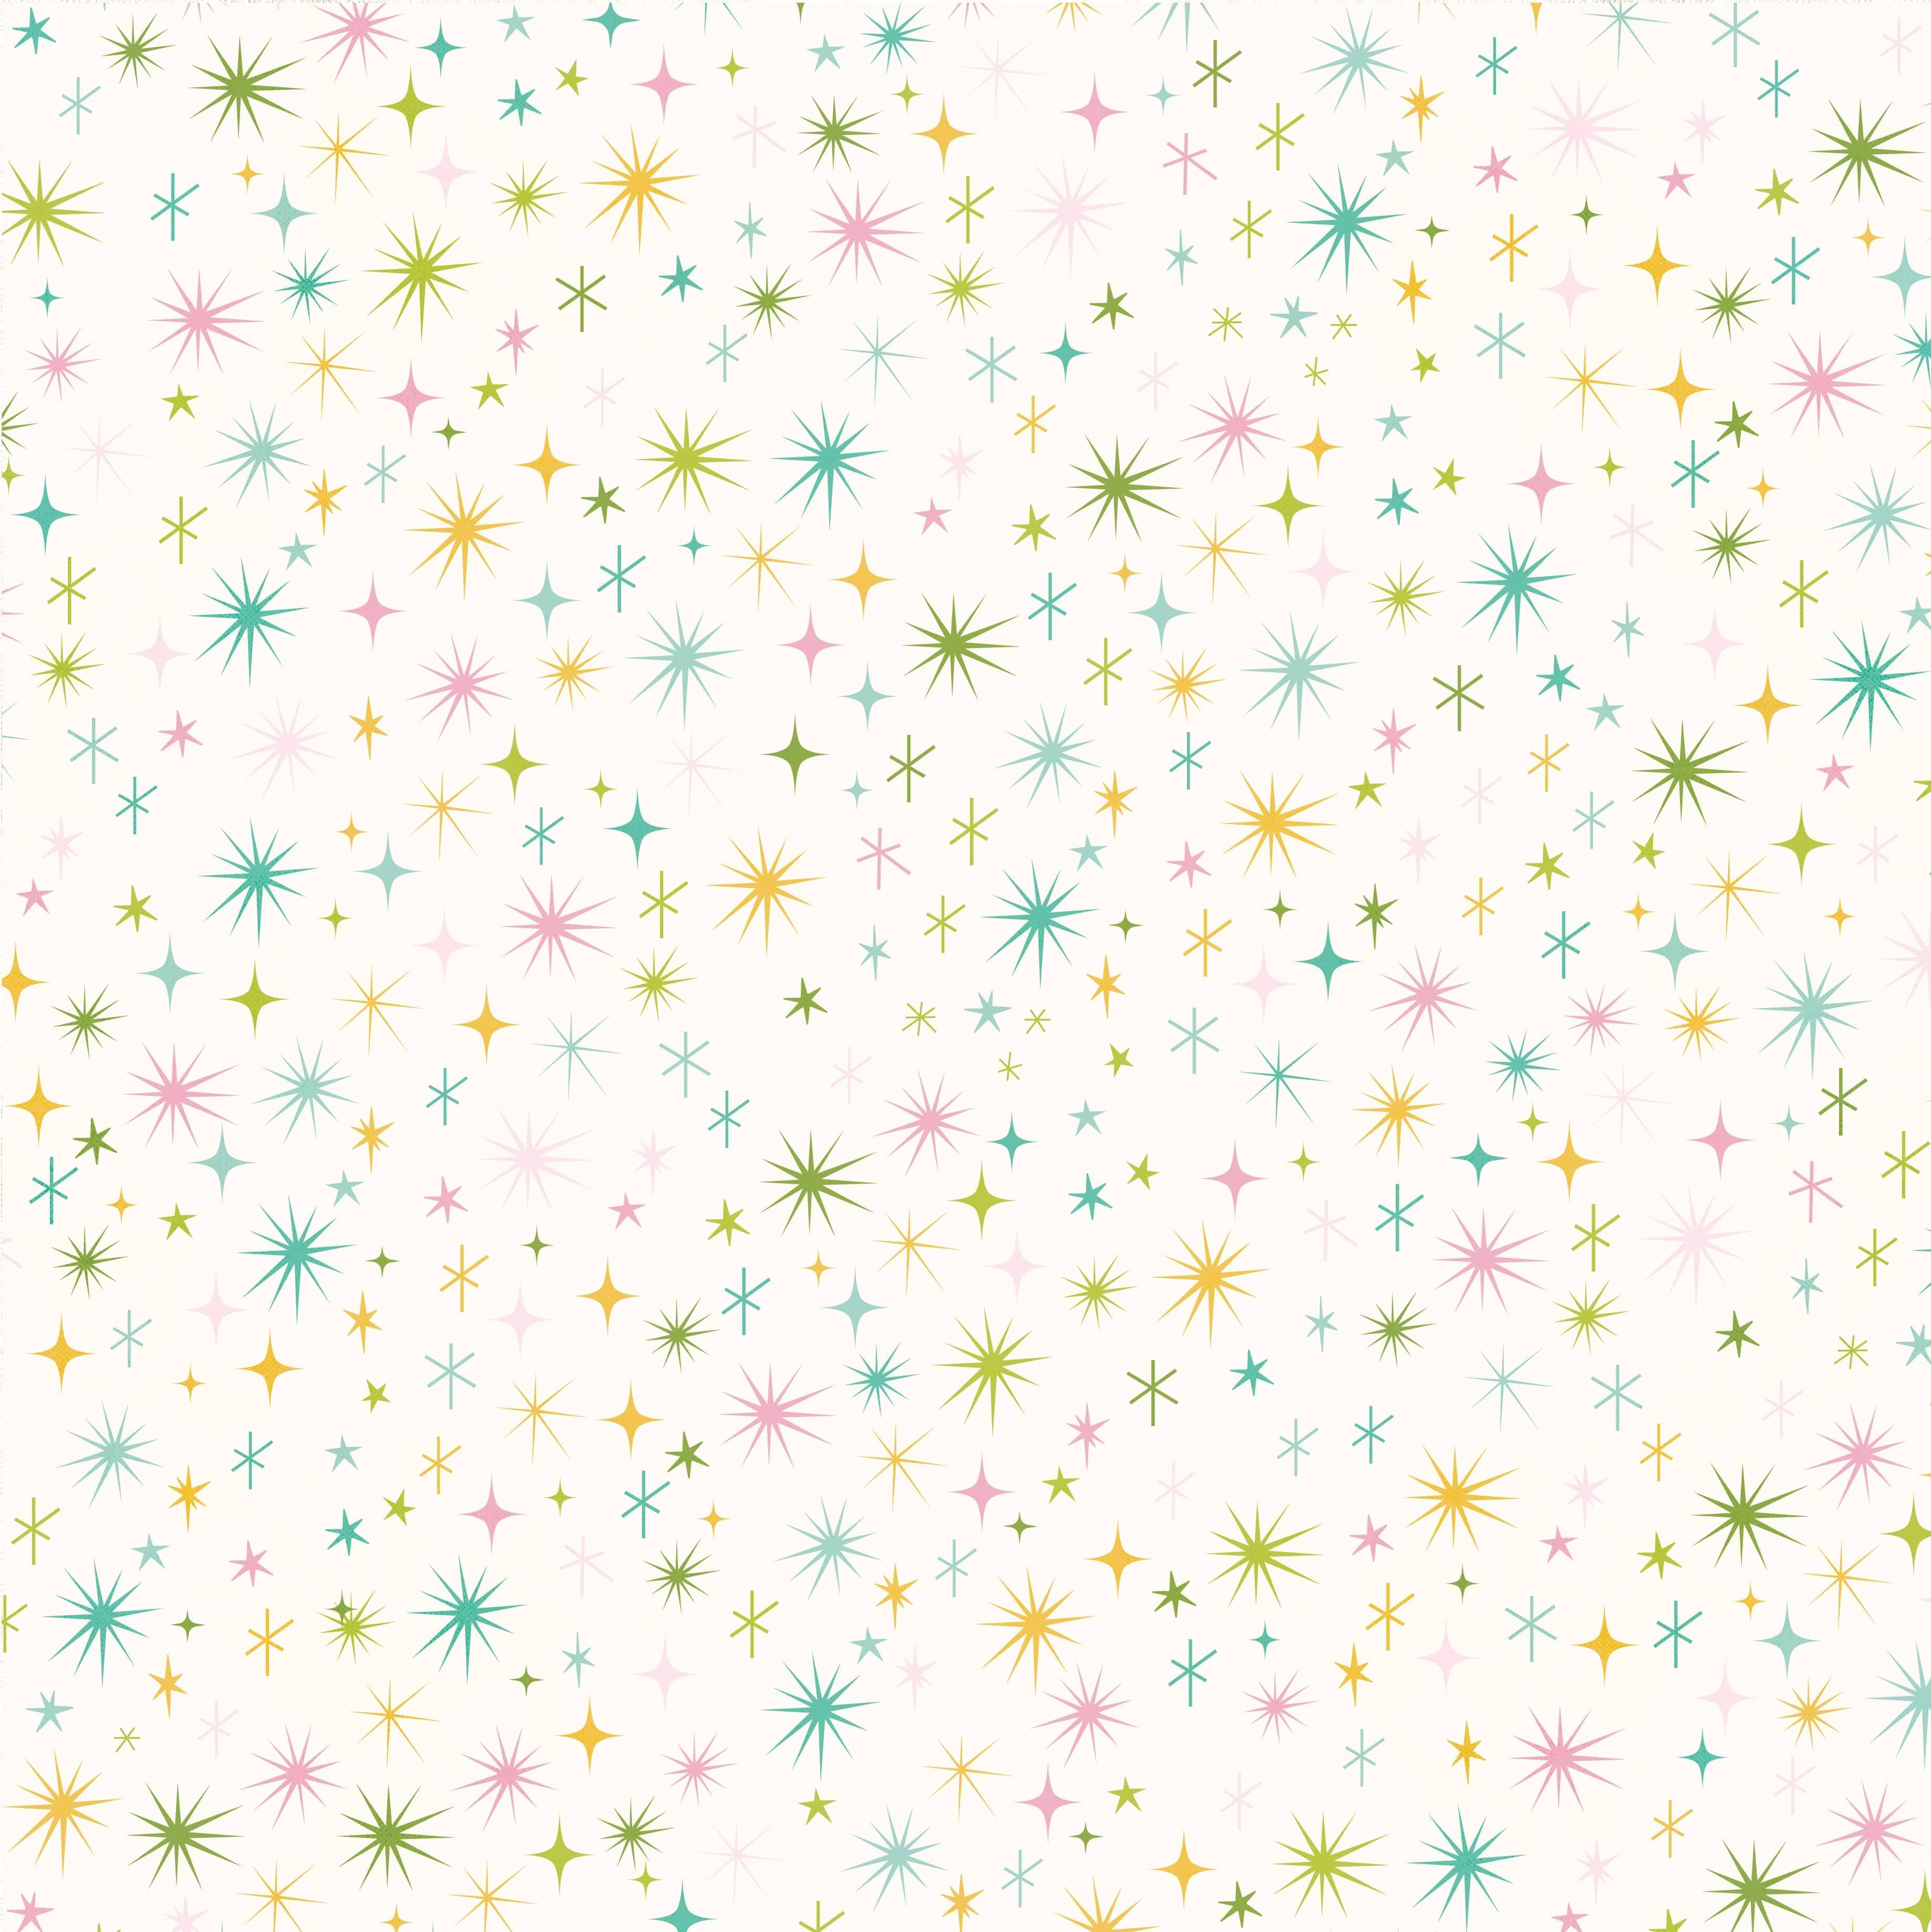 Say Cheese Fantasy At The Park Collection Elements 2 12 x 12 Double-Sided Scrapbook Paper by Simple Stories - Scrapbook Supply Companies